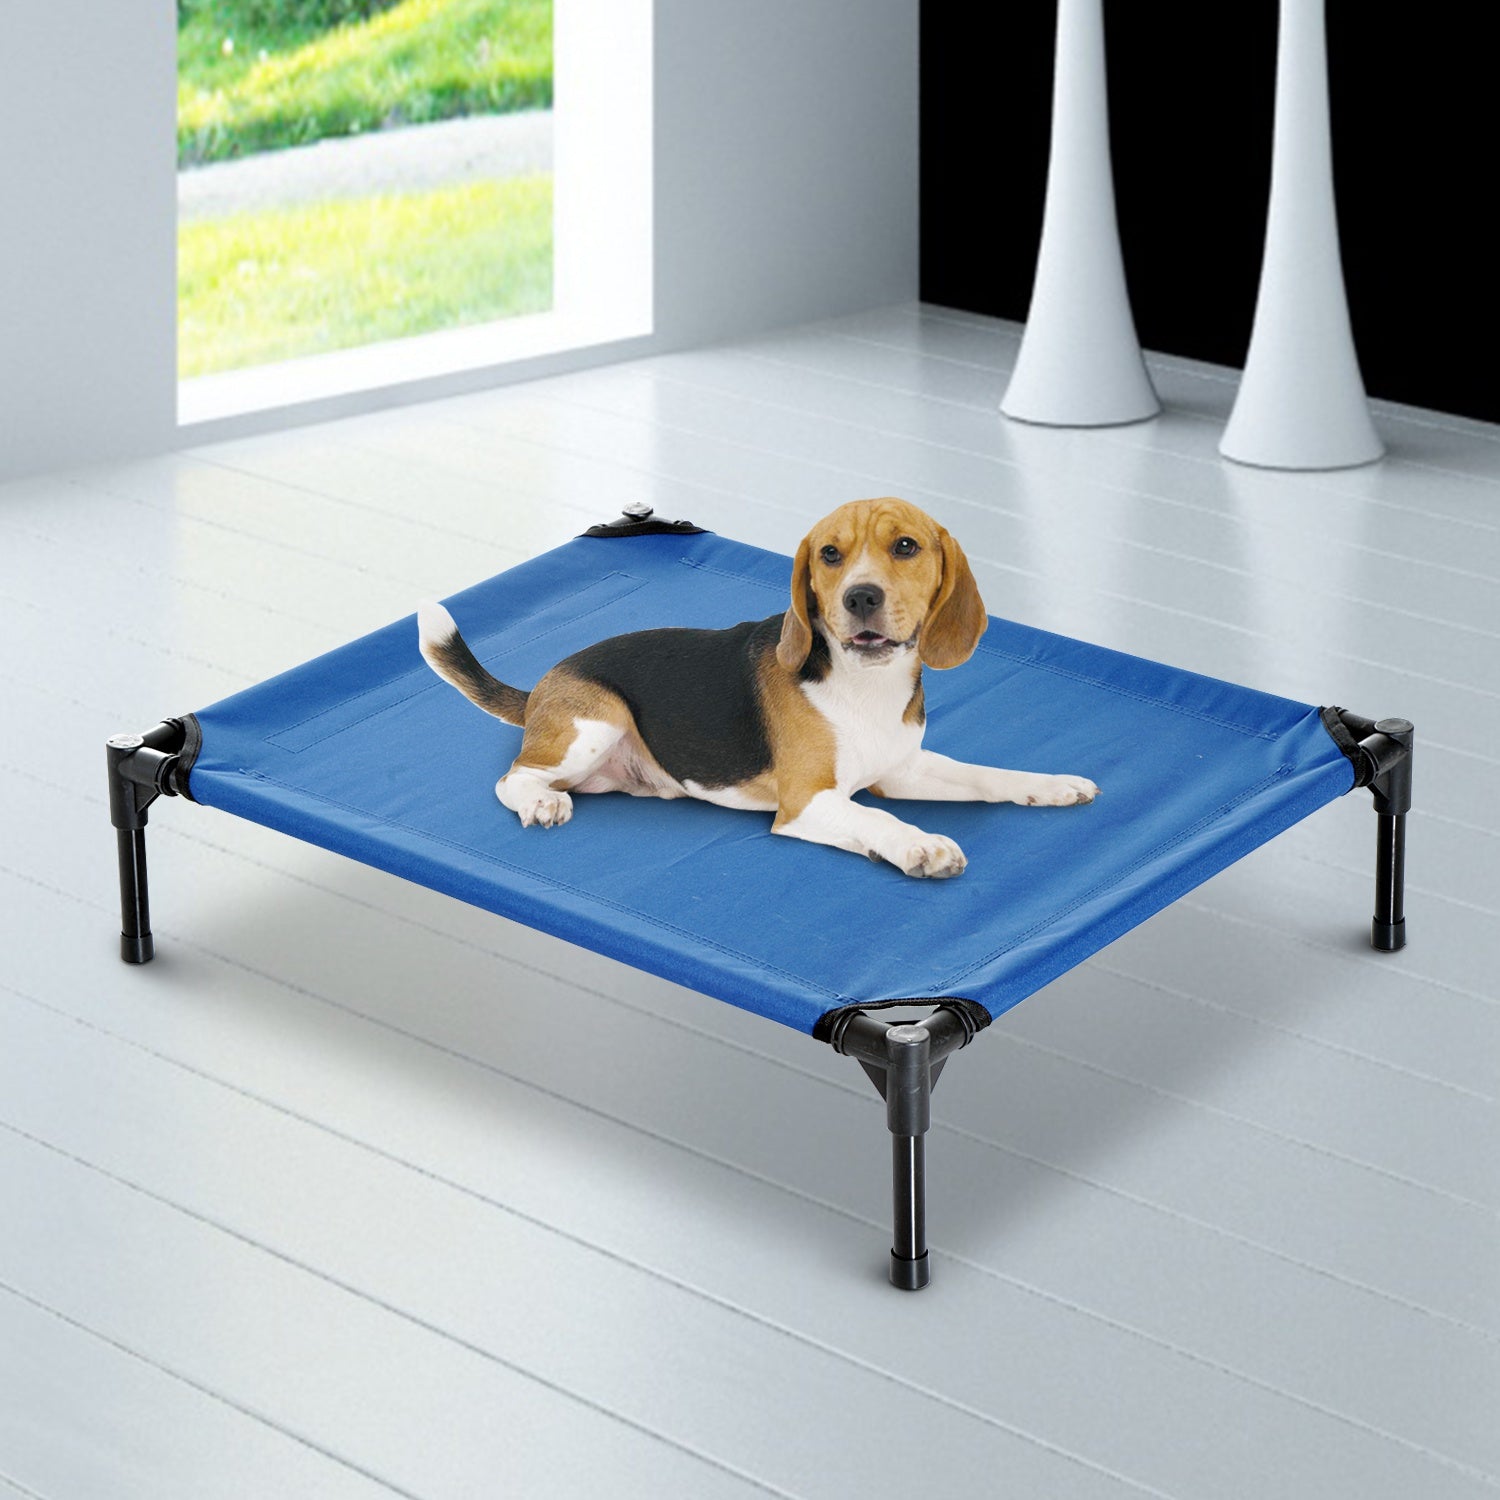 PawHut Elevated Pet Bed Portable Camping Raised Dog Bed w/ Metal Frame Blue (Medium) - Inspirely